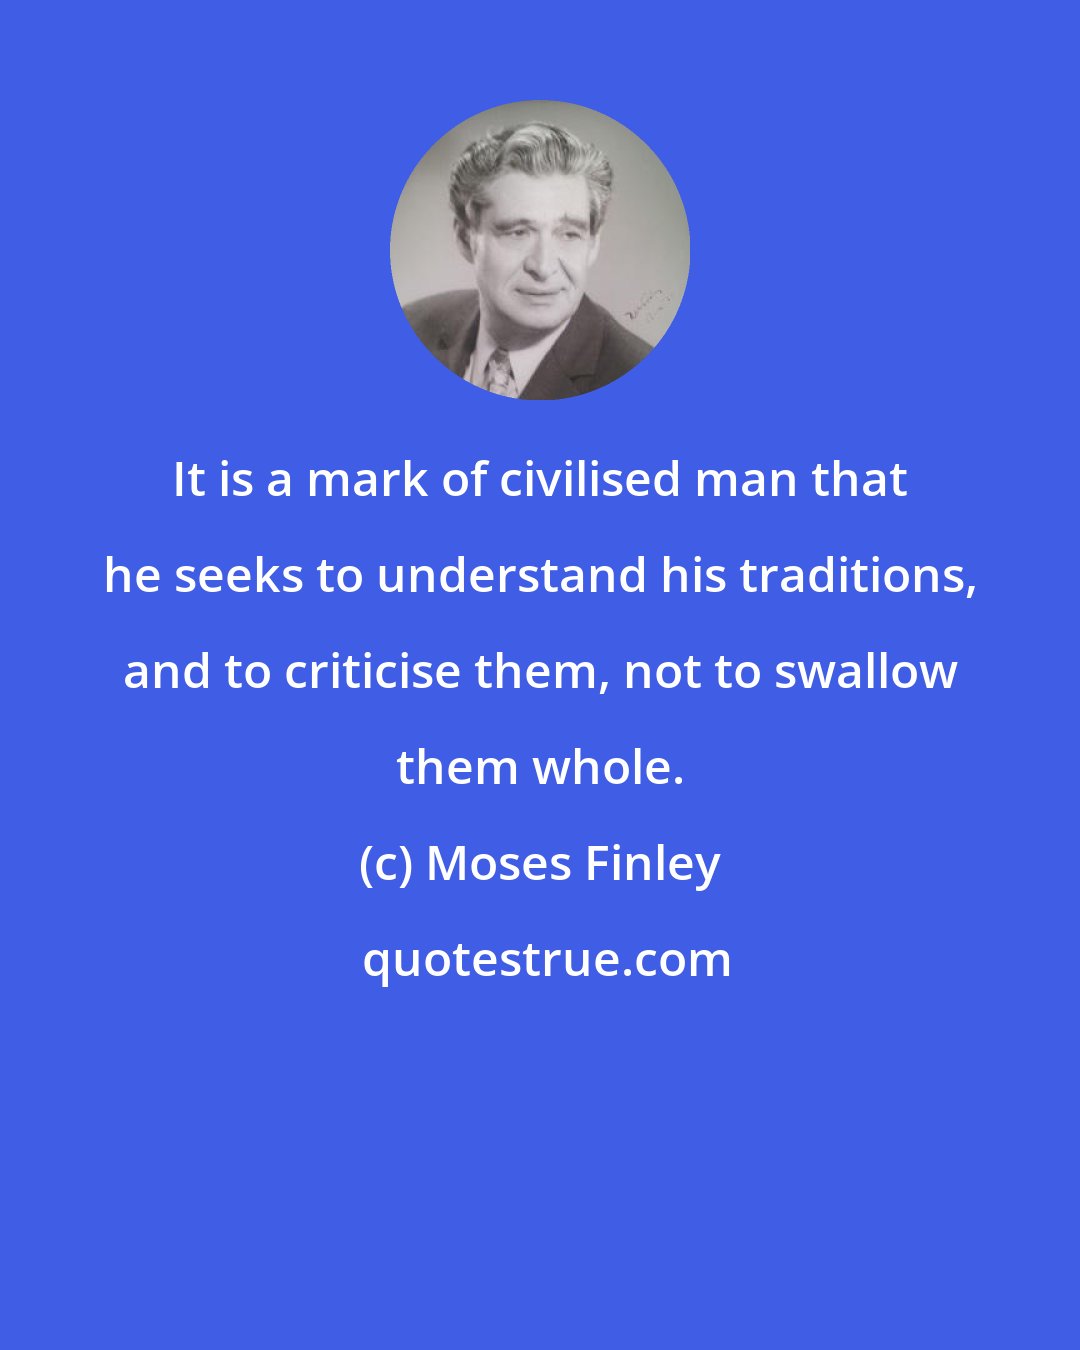 Moses Finley: It is a mark of civilised man that he seeks to understand his traditions, and to criticise them, not to swallow them whole.